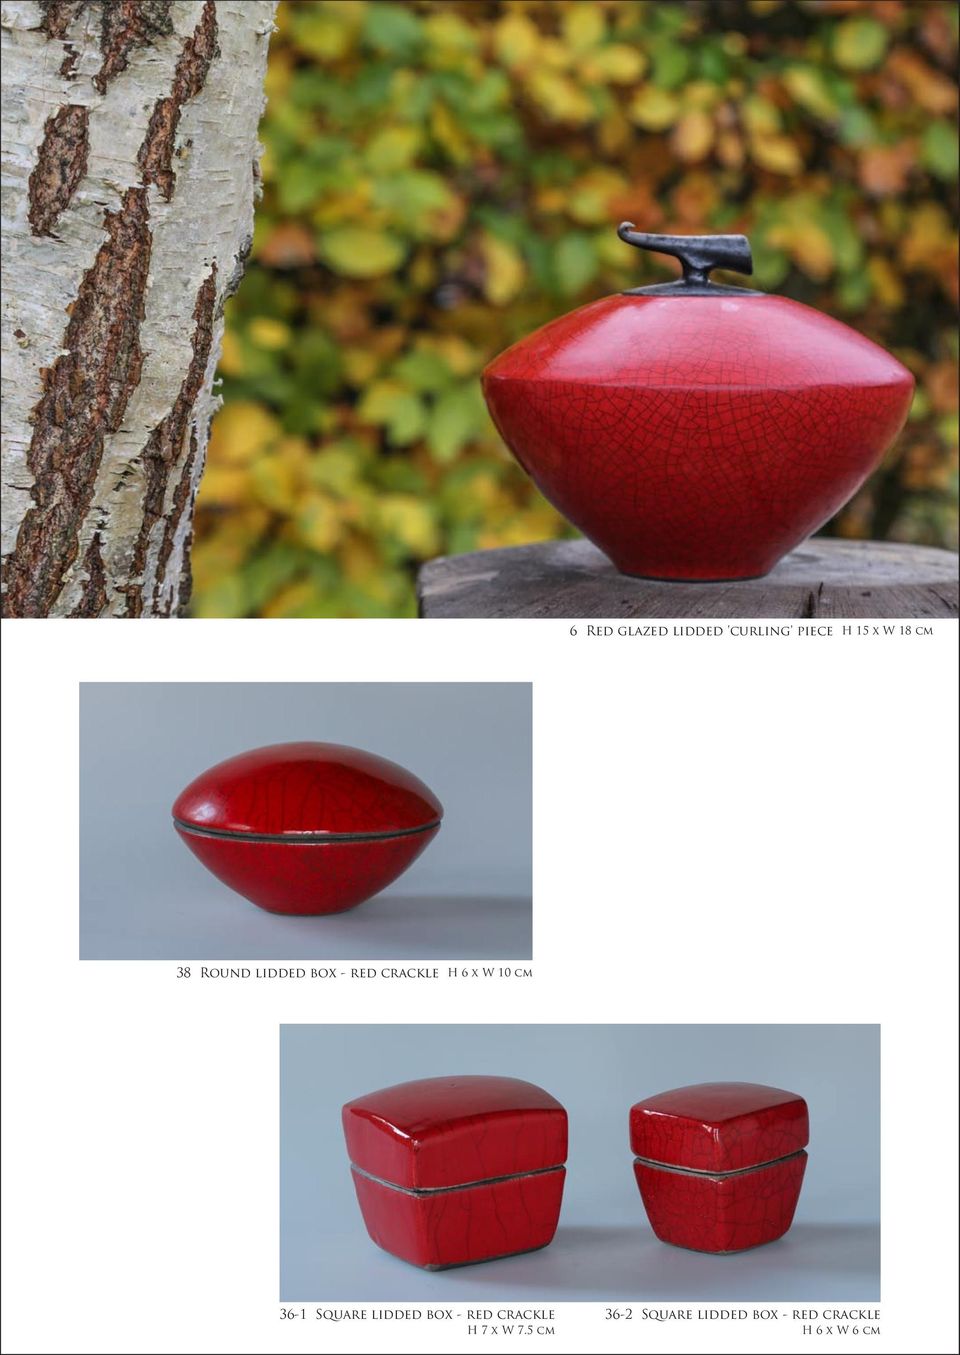 cm 36-1 Square lidded box - red crackle H 7 x W 7.